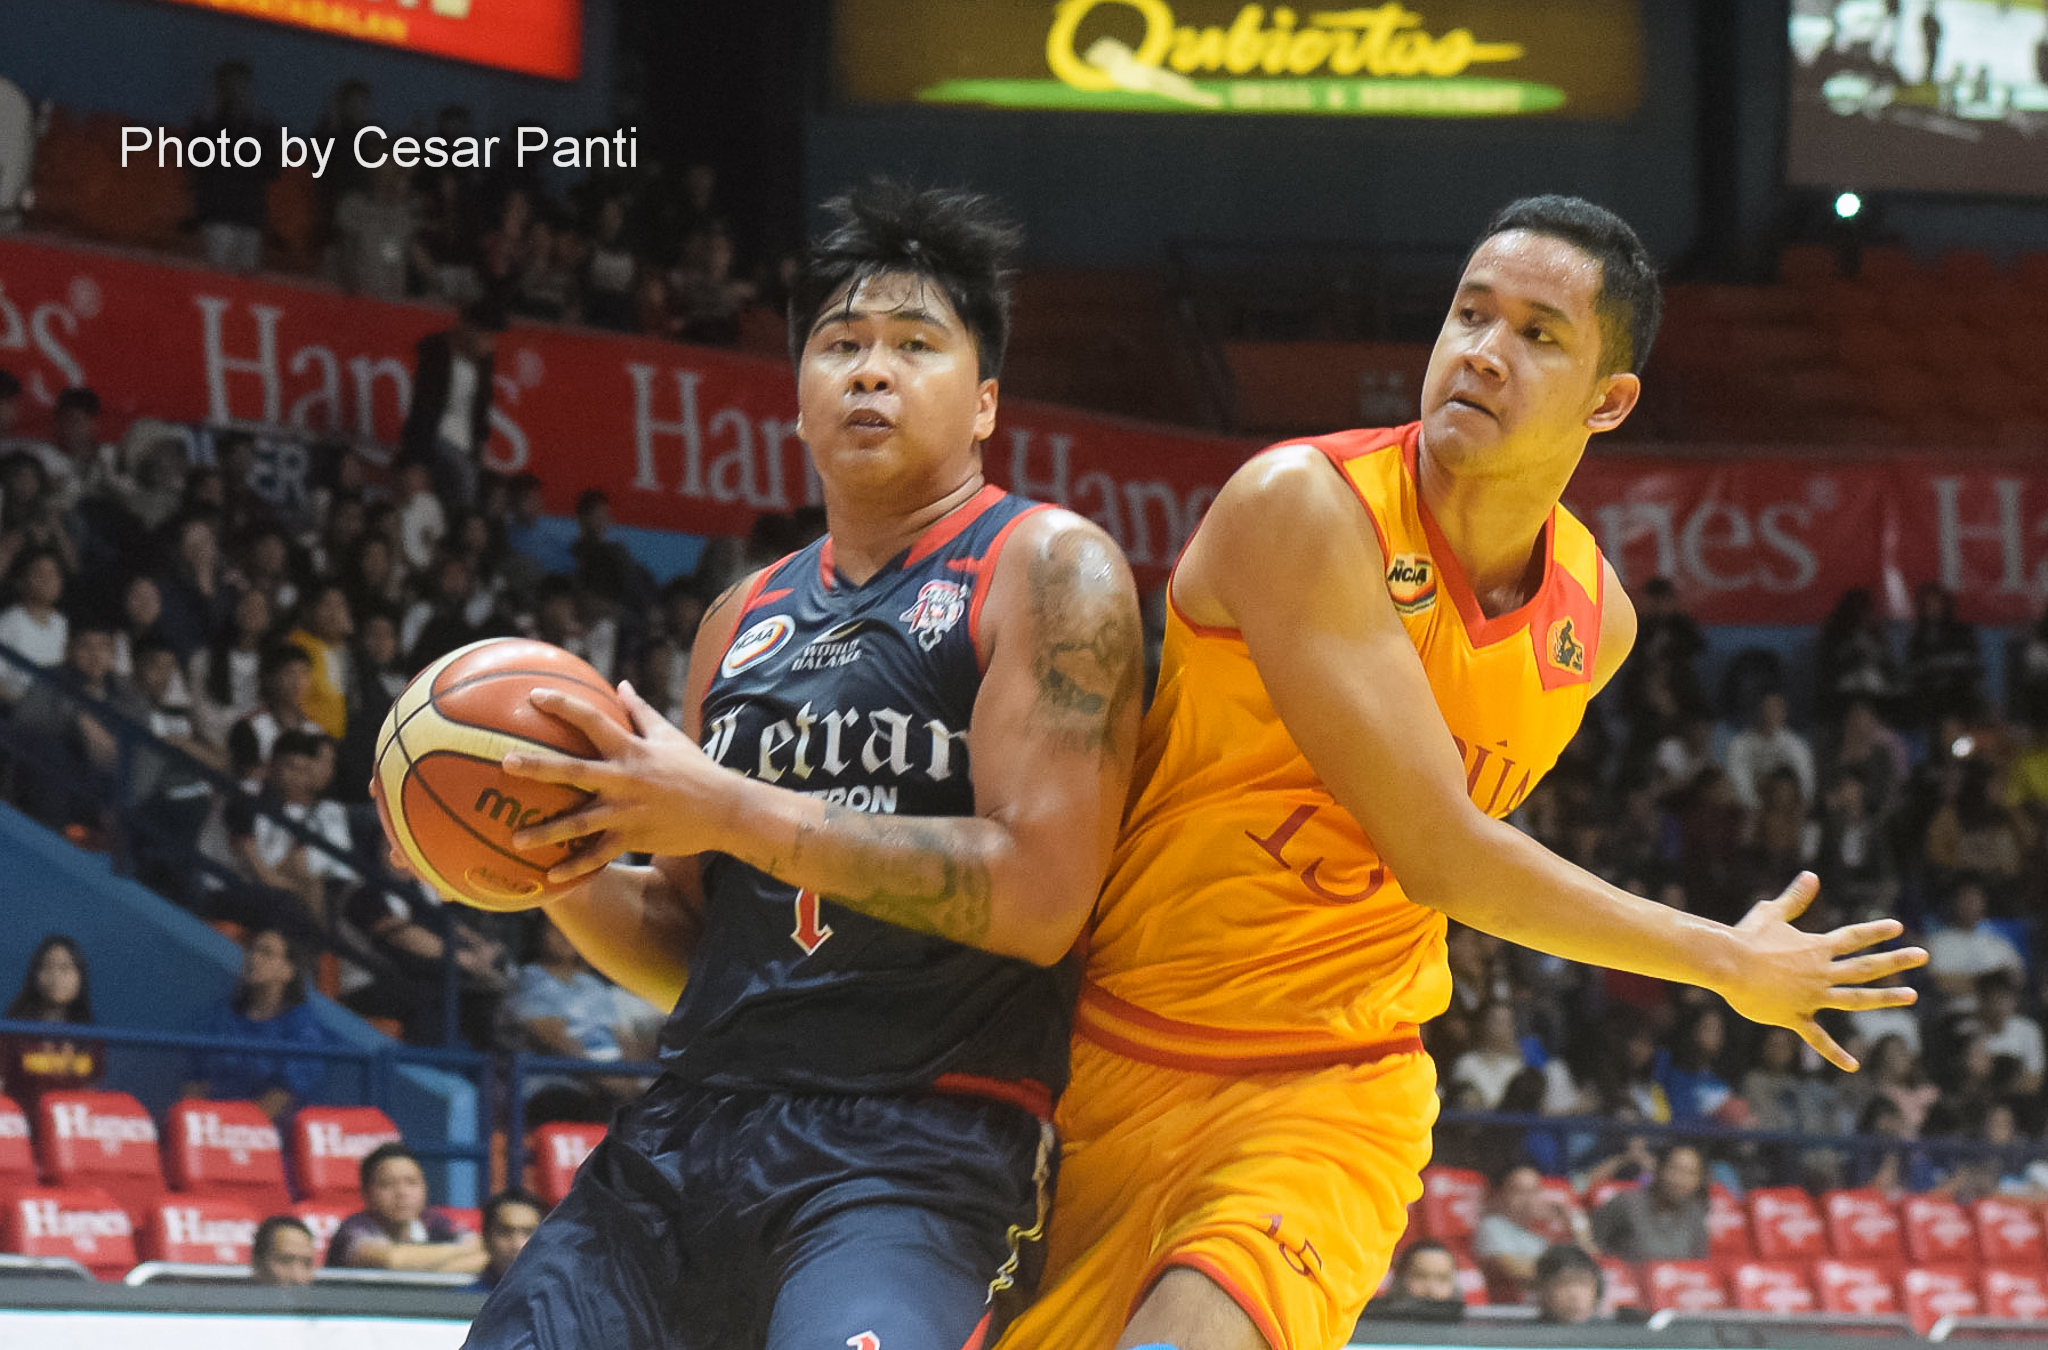 Letran survives late Mapua rally to stretch win streak to five